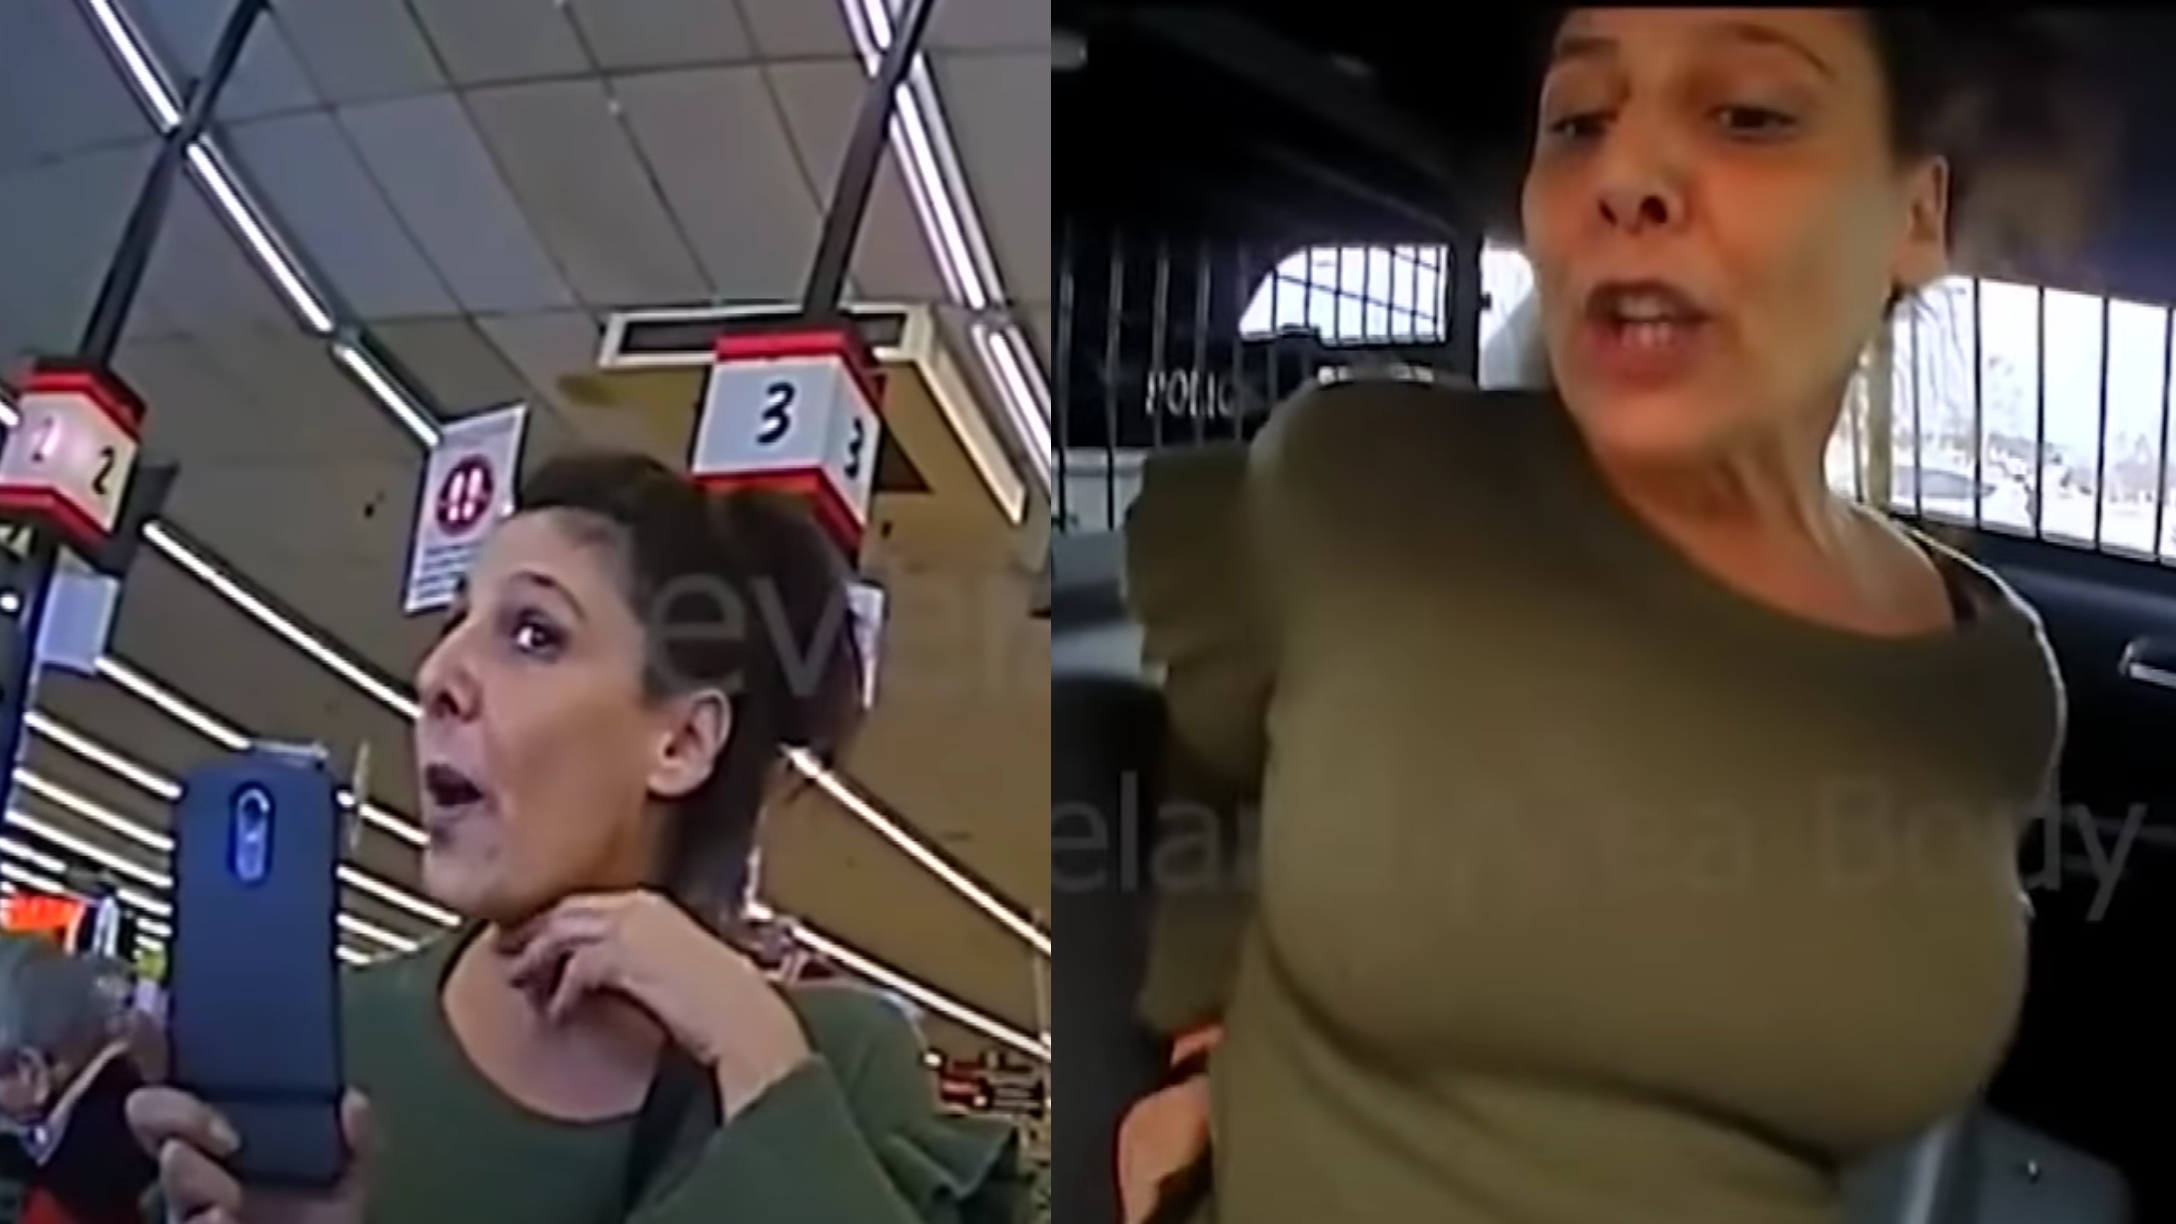 Your Boobs are Hanging Out:' Gym Karen Shames New Mom Over Workout Attire